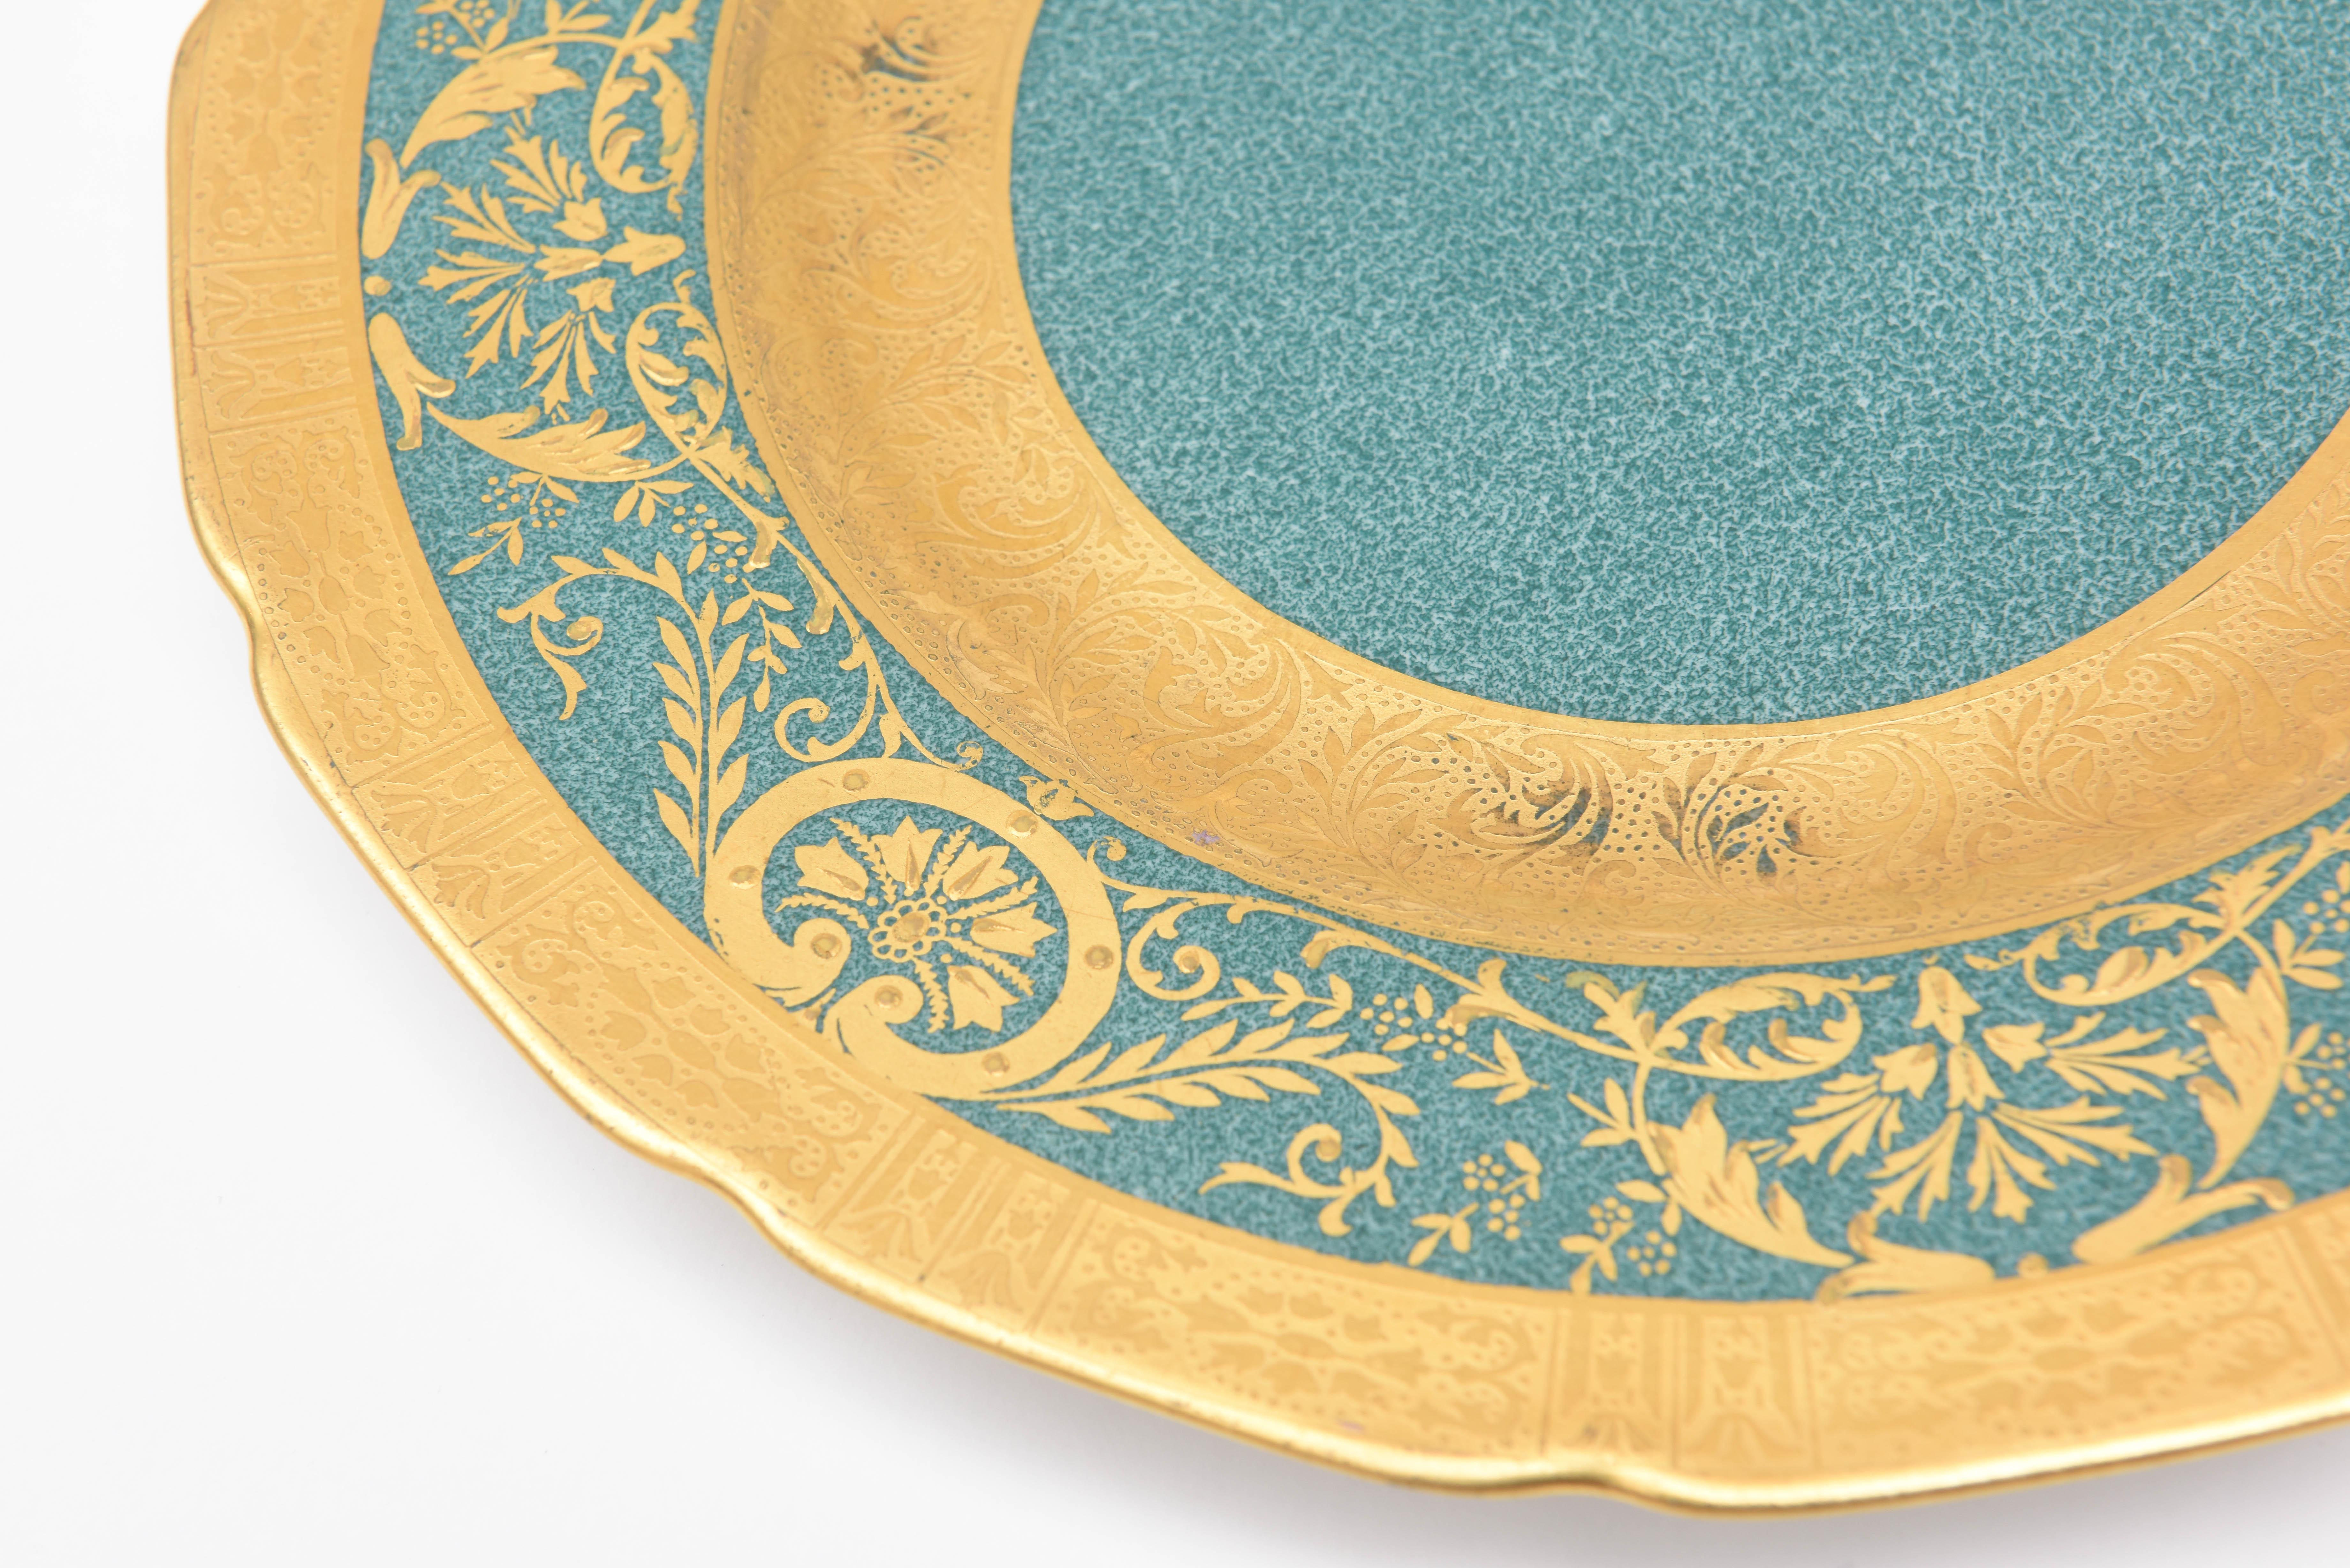 English Set of 11 Vibrant Teal or Turquoise Green and Gilt Encrusted Dessert Plates